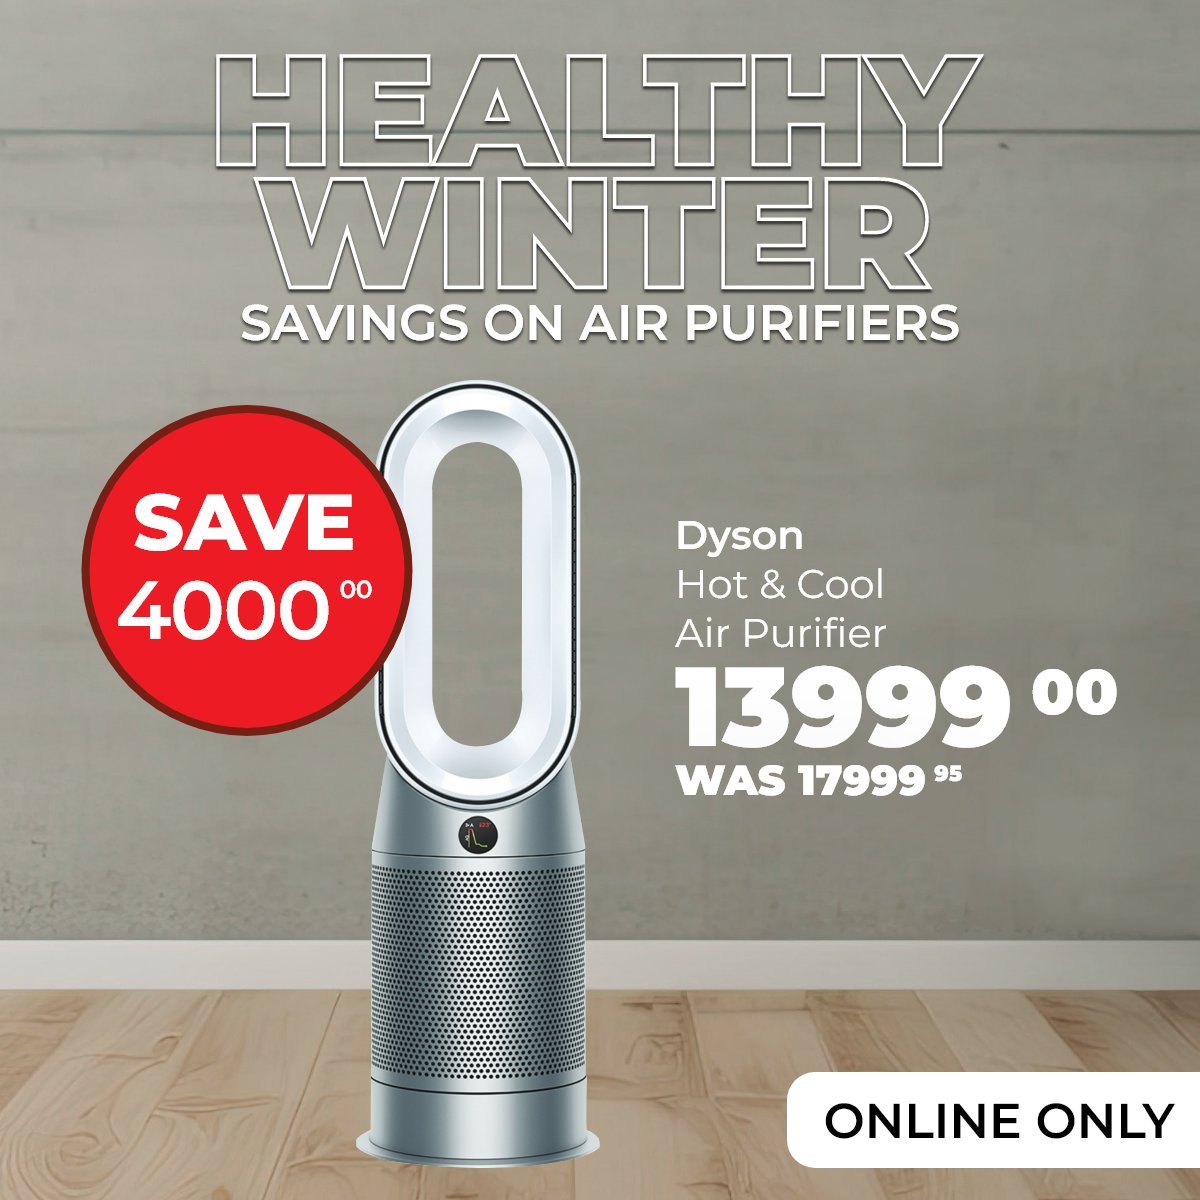 We’ve got an online-only deal to keep you warm and so much more this winter! A hot & cool air purifier is just what you need to keep your home healthy. Get yours here: bit.ly/3K6wuoC
Offer valid from 16 May - 9 June 2024
#DisChem #Dyson #AirPurifier #OnlineOnlyDeal